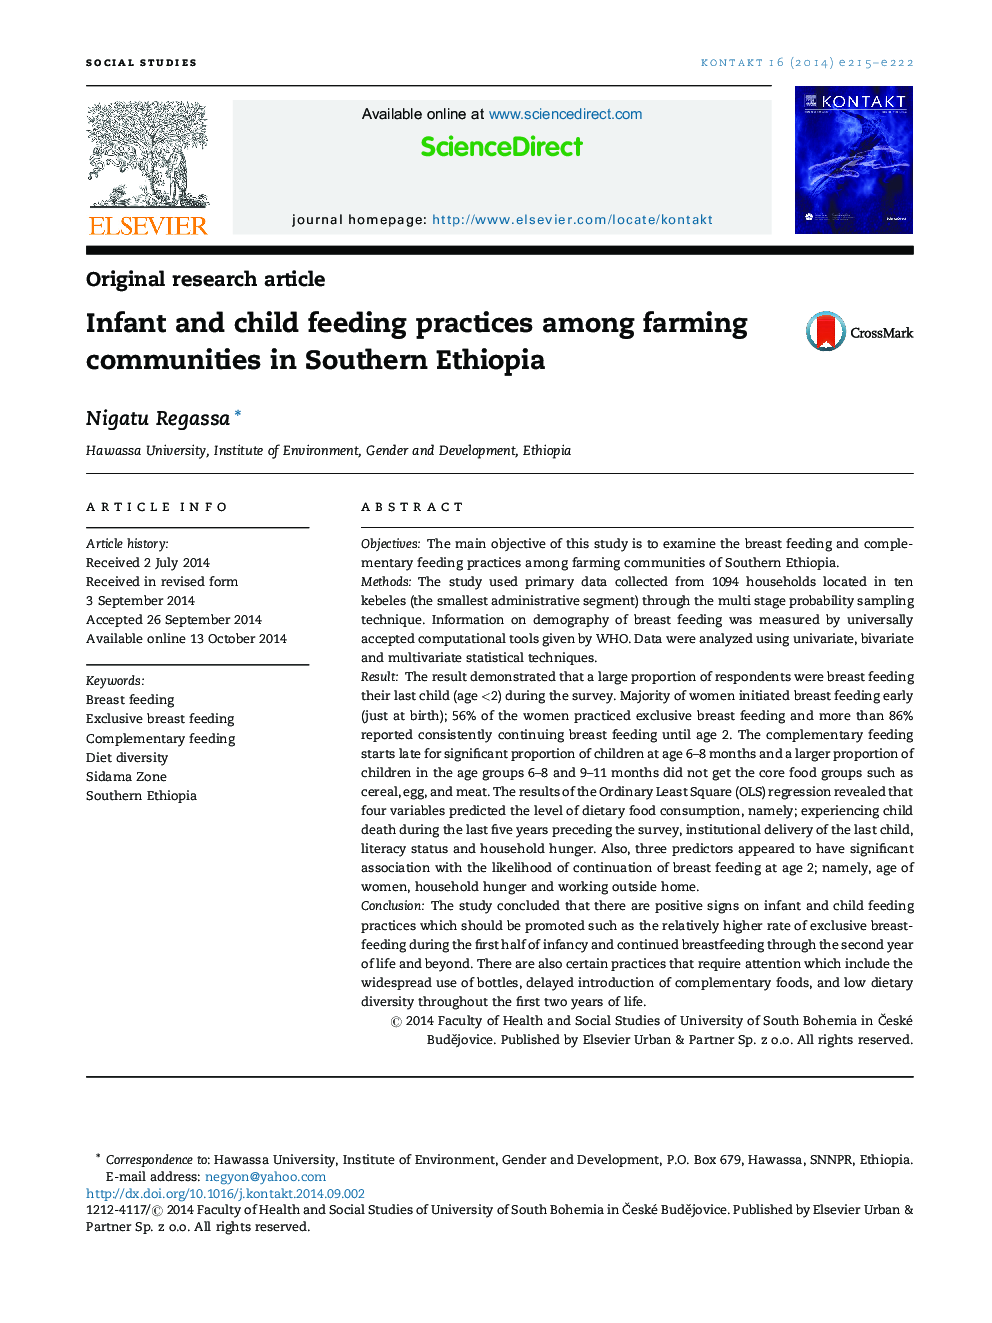 Infant and child feeding practices among farming communities in Southern Ethiopia